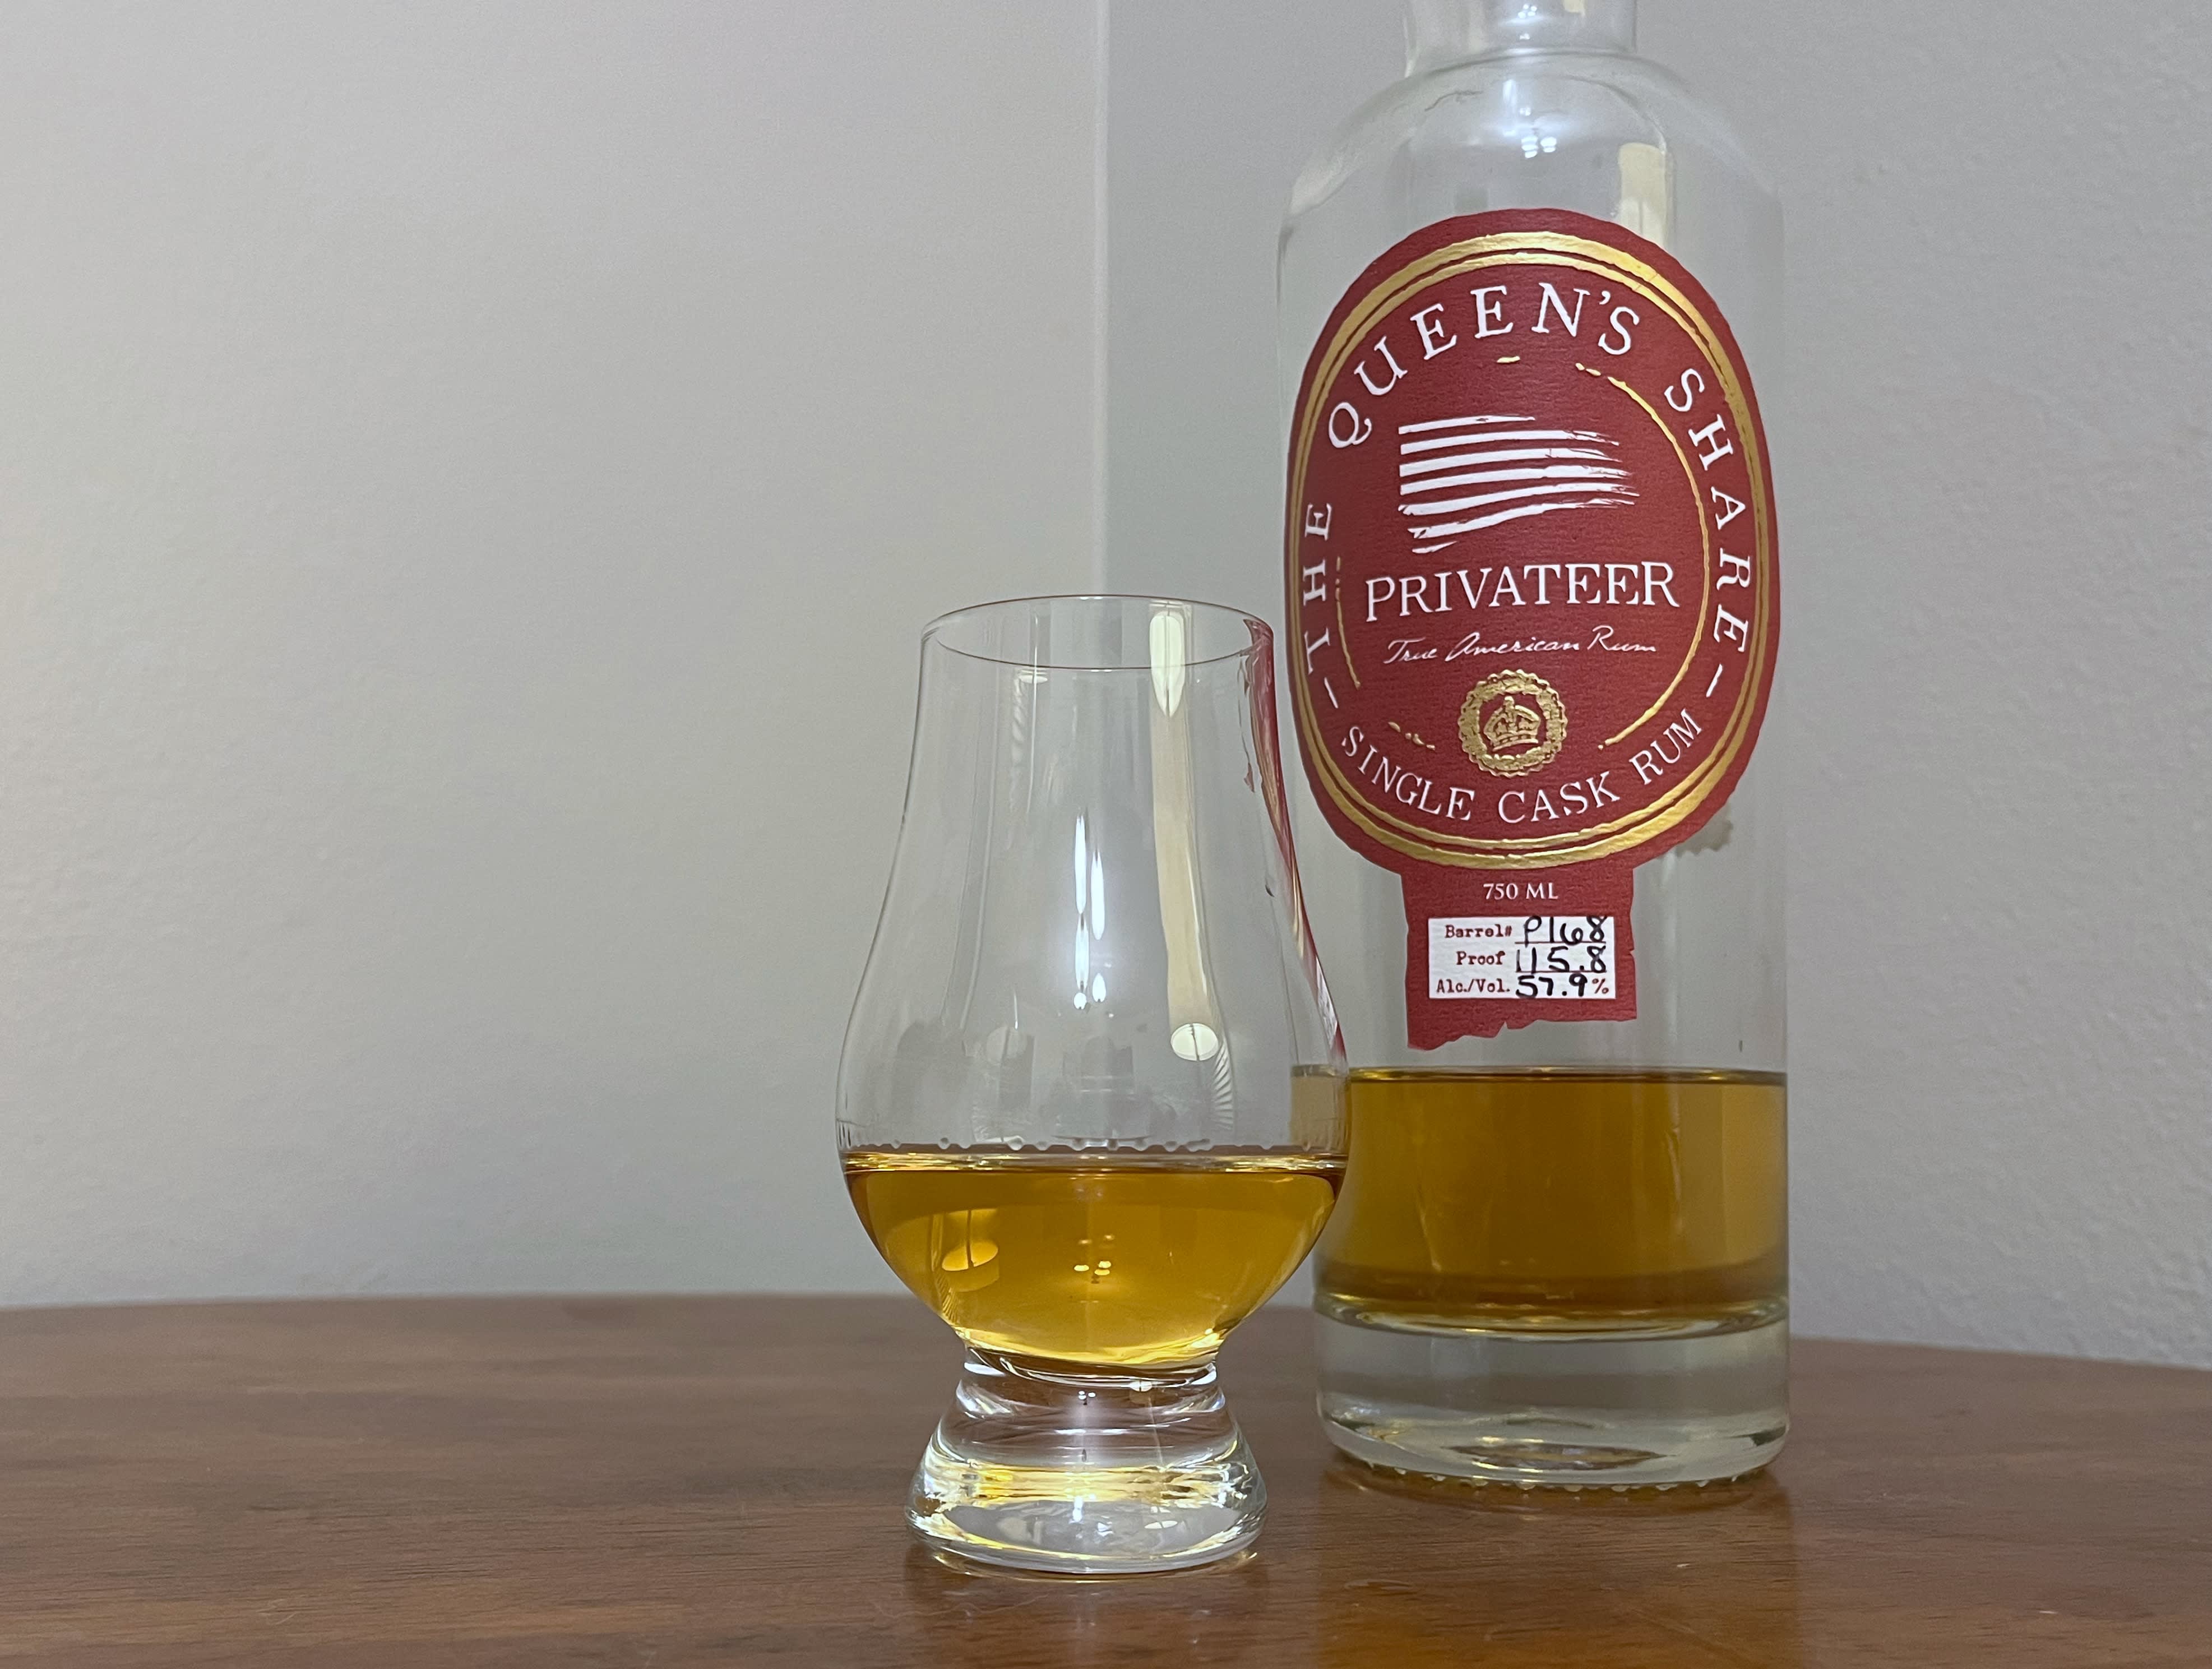 Privateer Queen's Share bottle sitting on a table next to a glass of rum